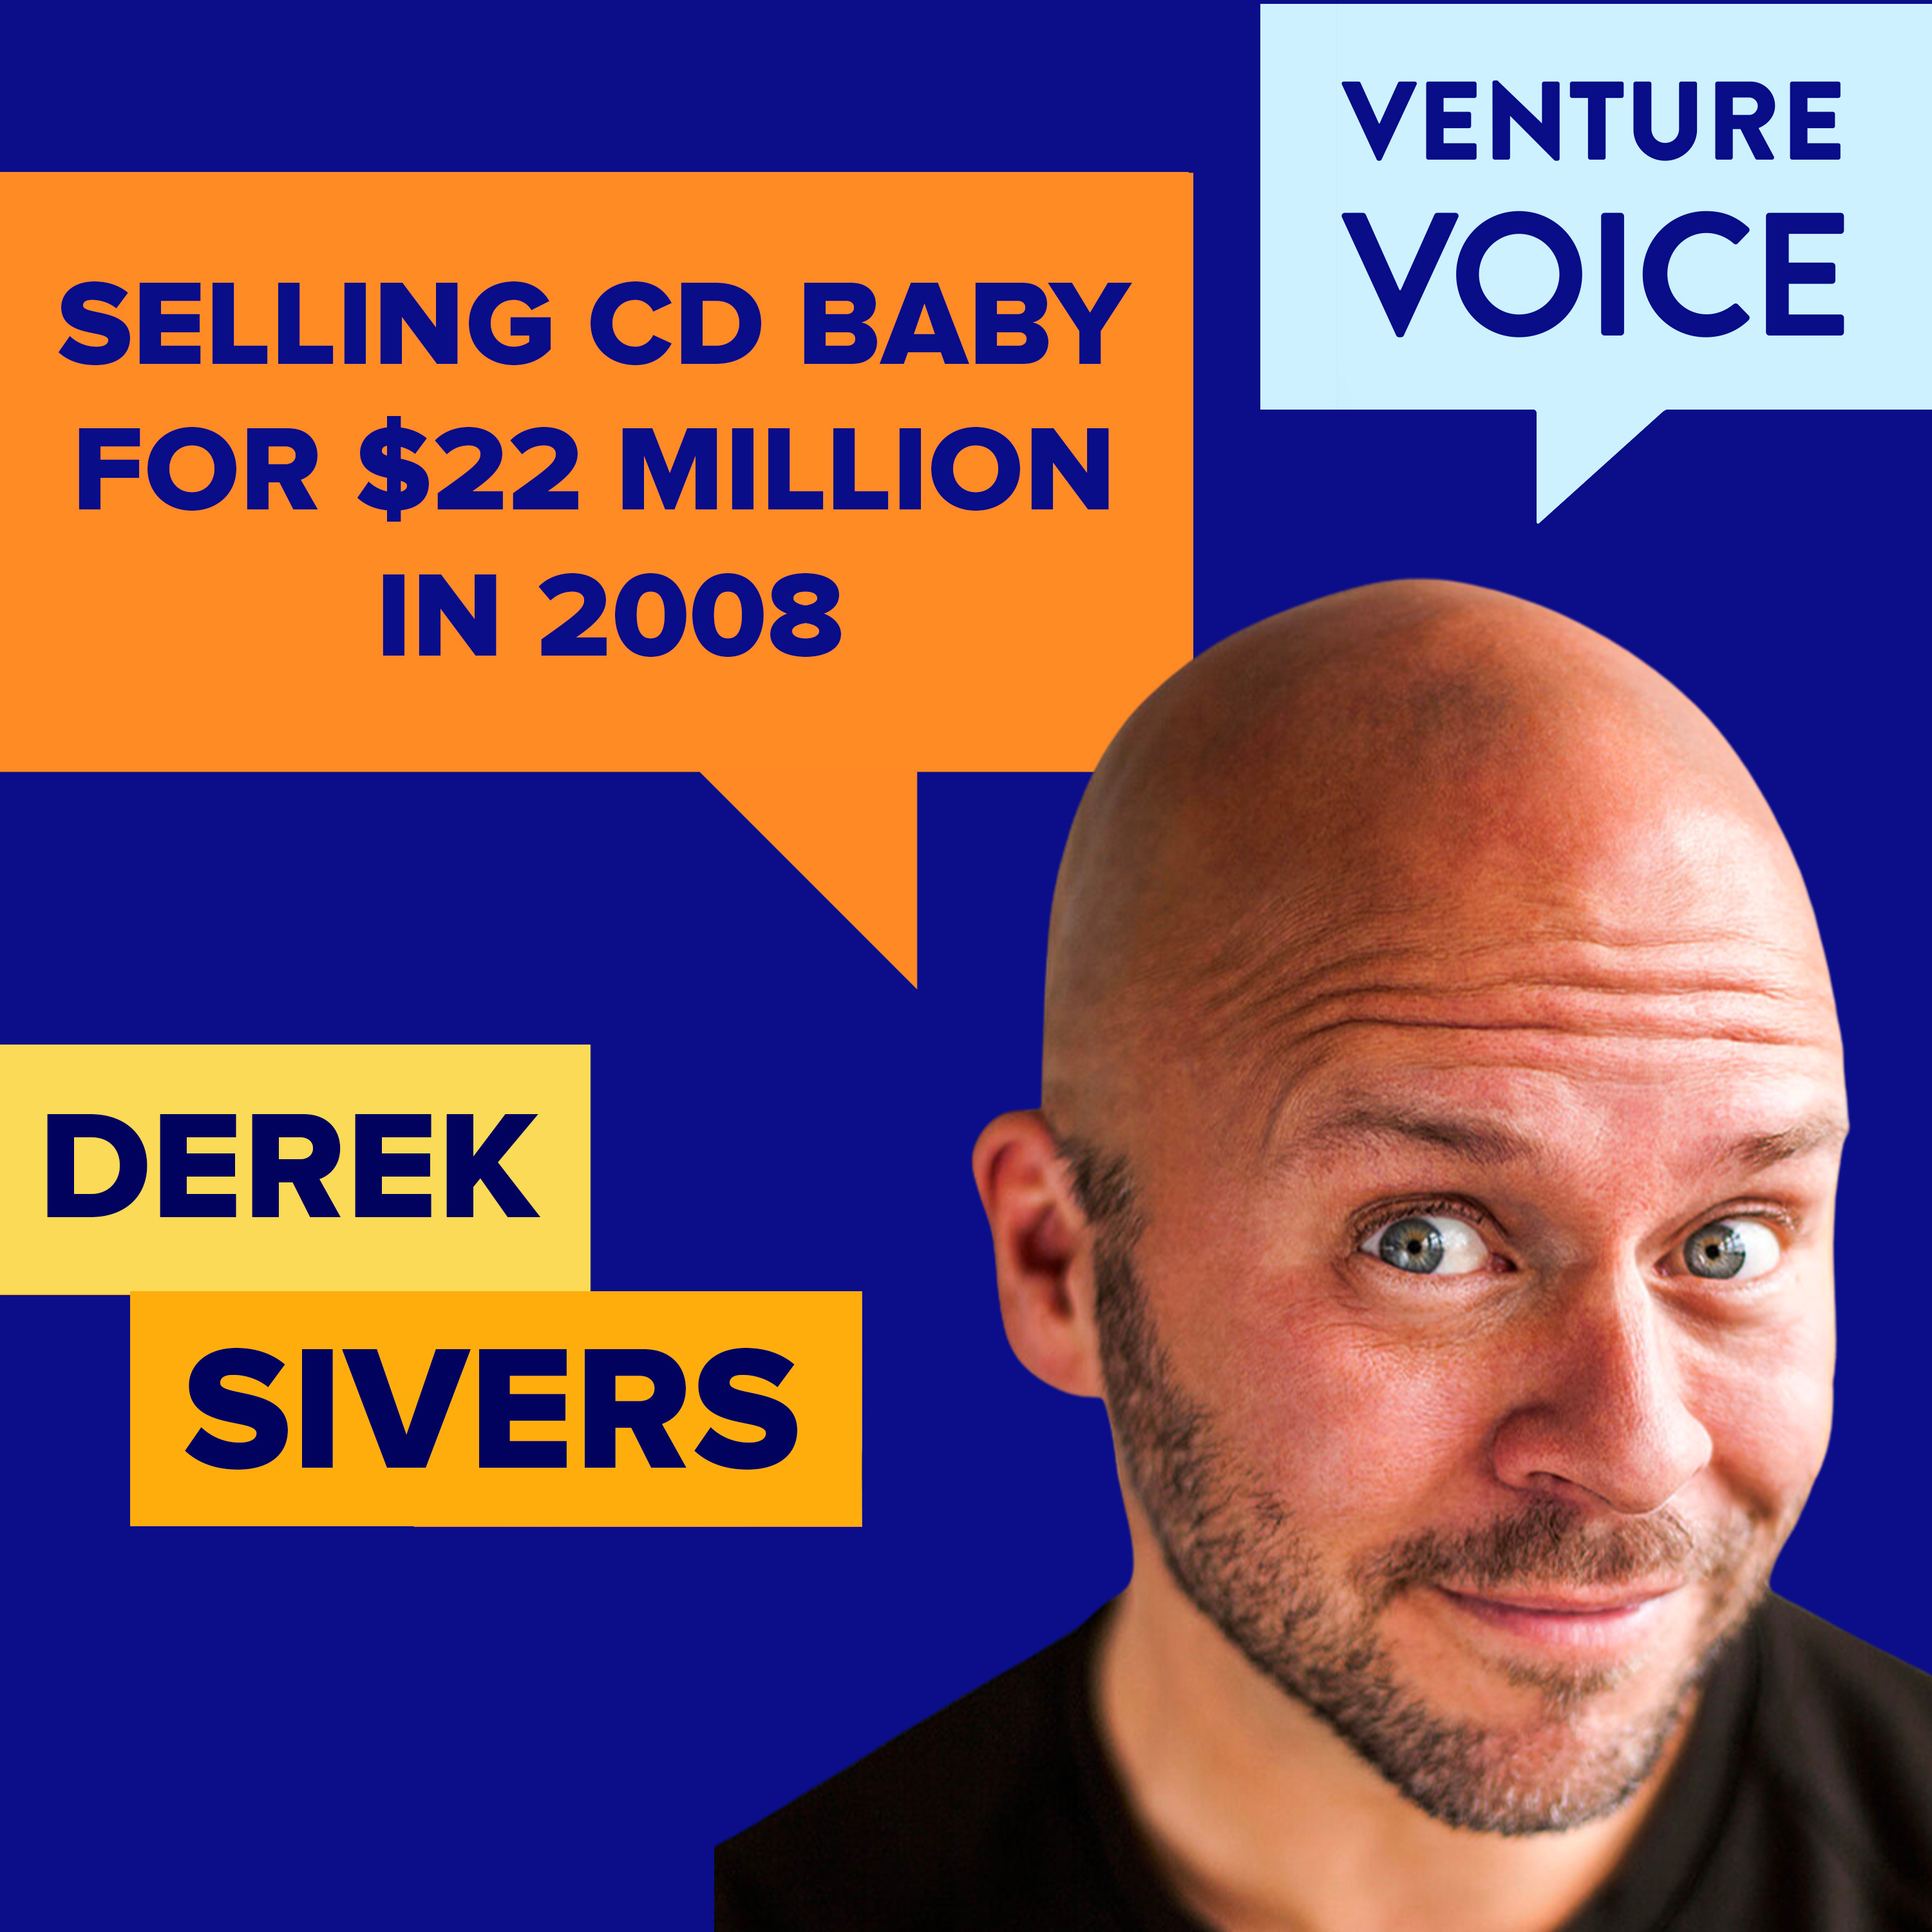 How Derek Sivers decided to sell CD Baby